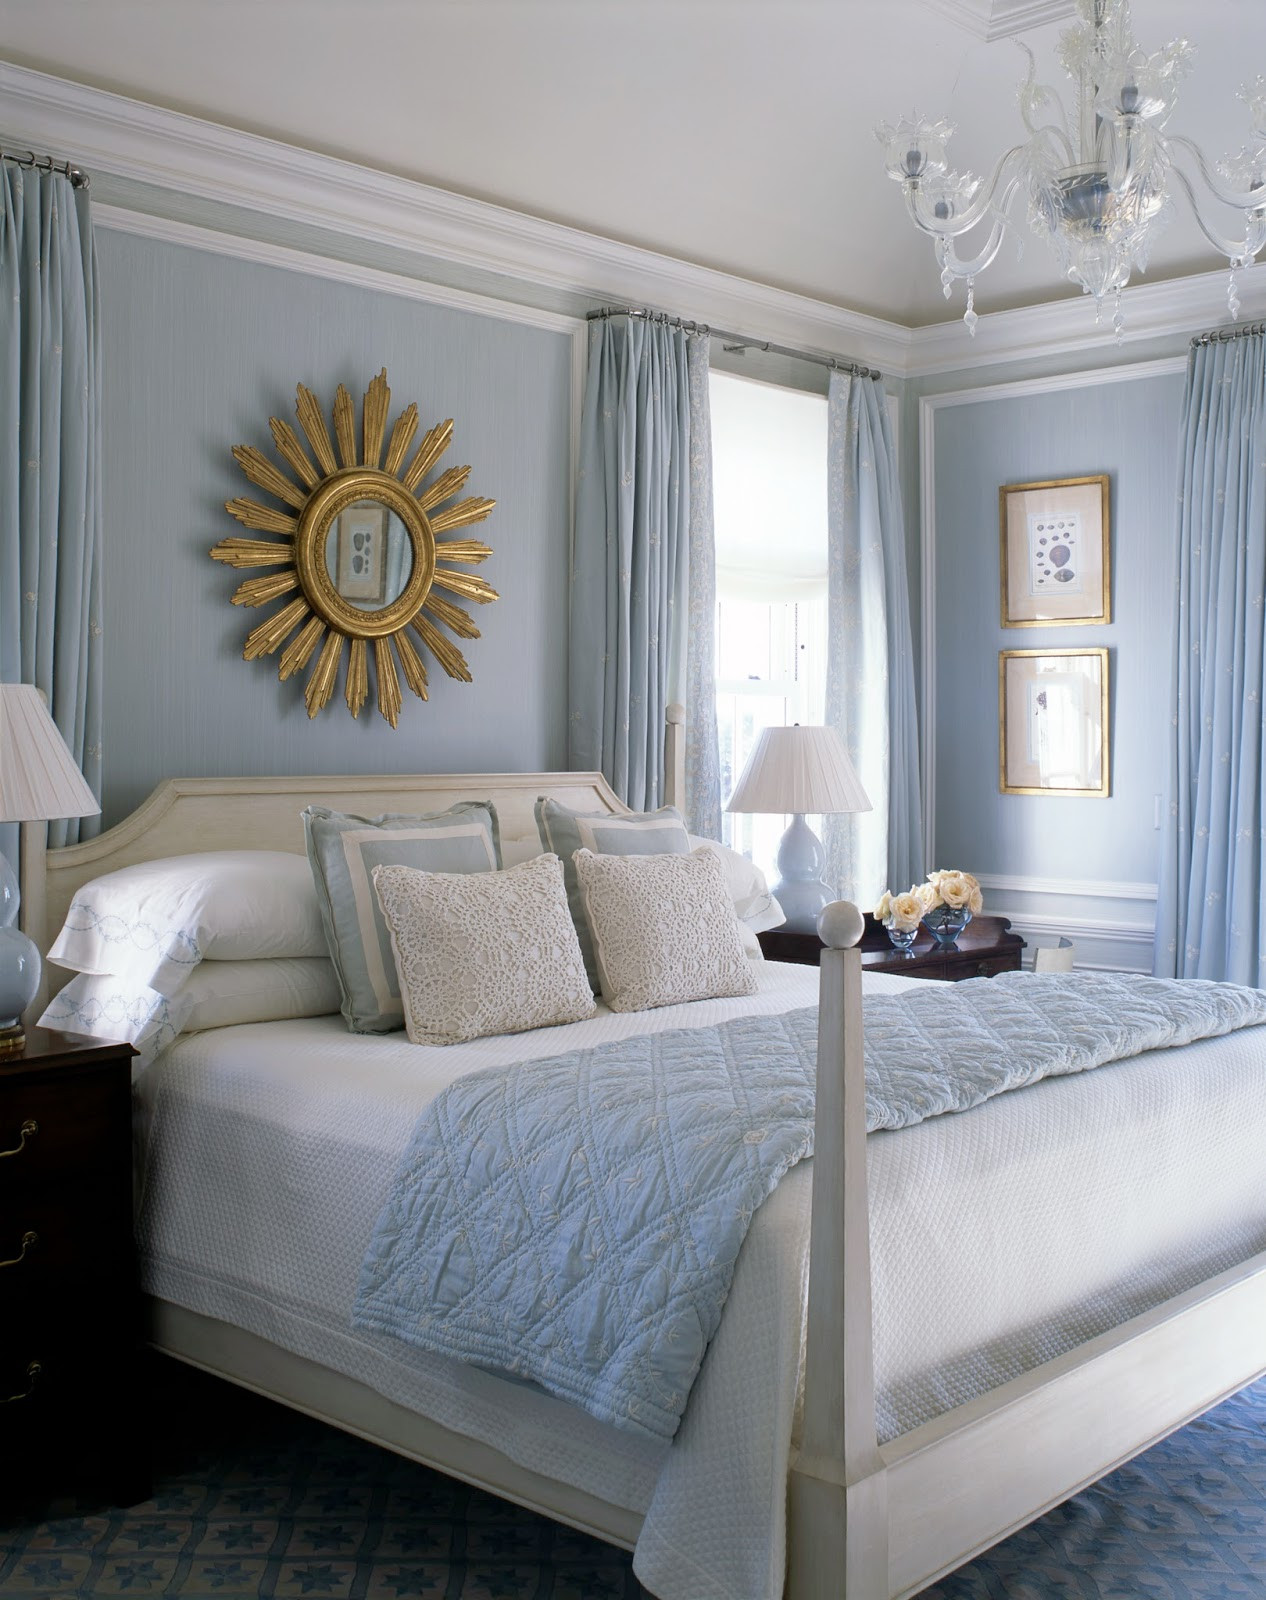 Blue Bedroom Walls
 A Blue and White Beach House by Phoebe and Jim Howard